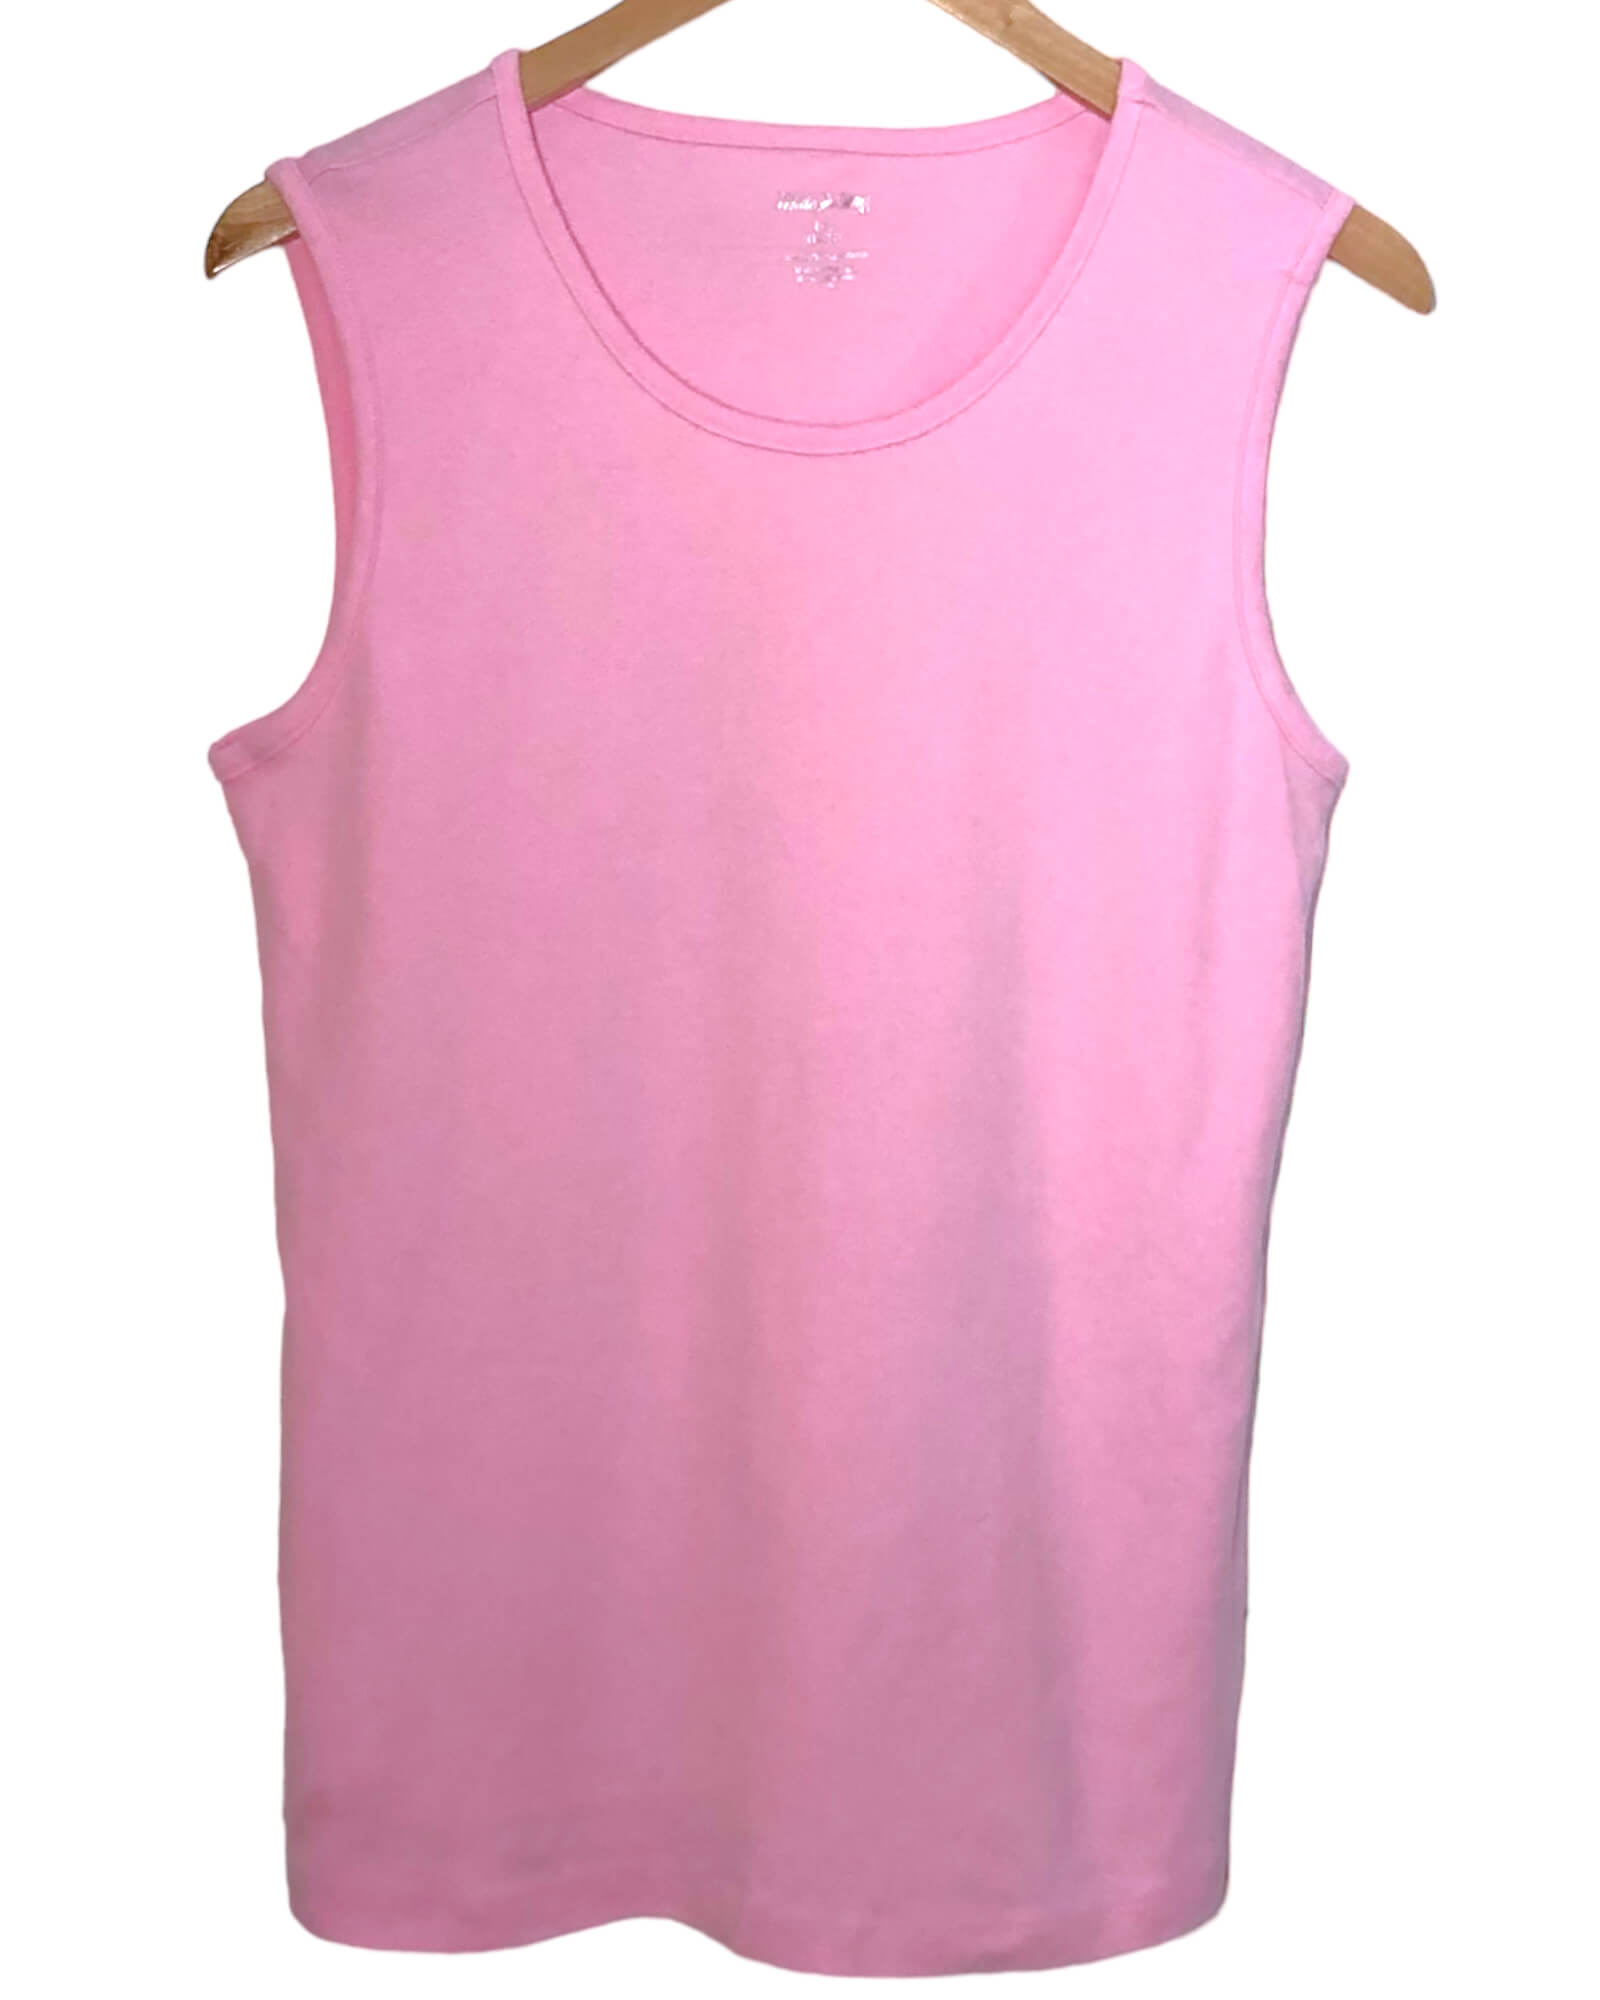 Cool Summer WHITE STAG pink sleeveless t-shirt